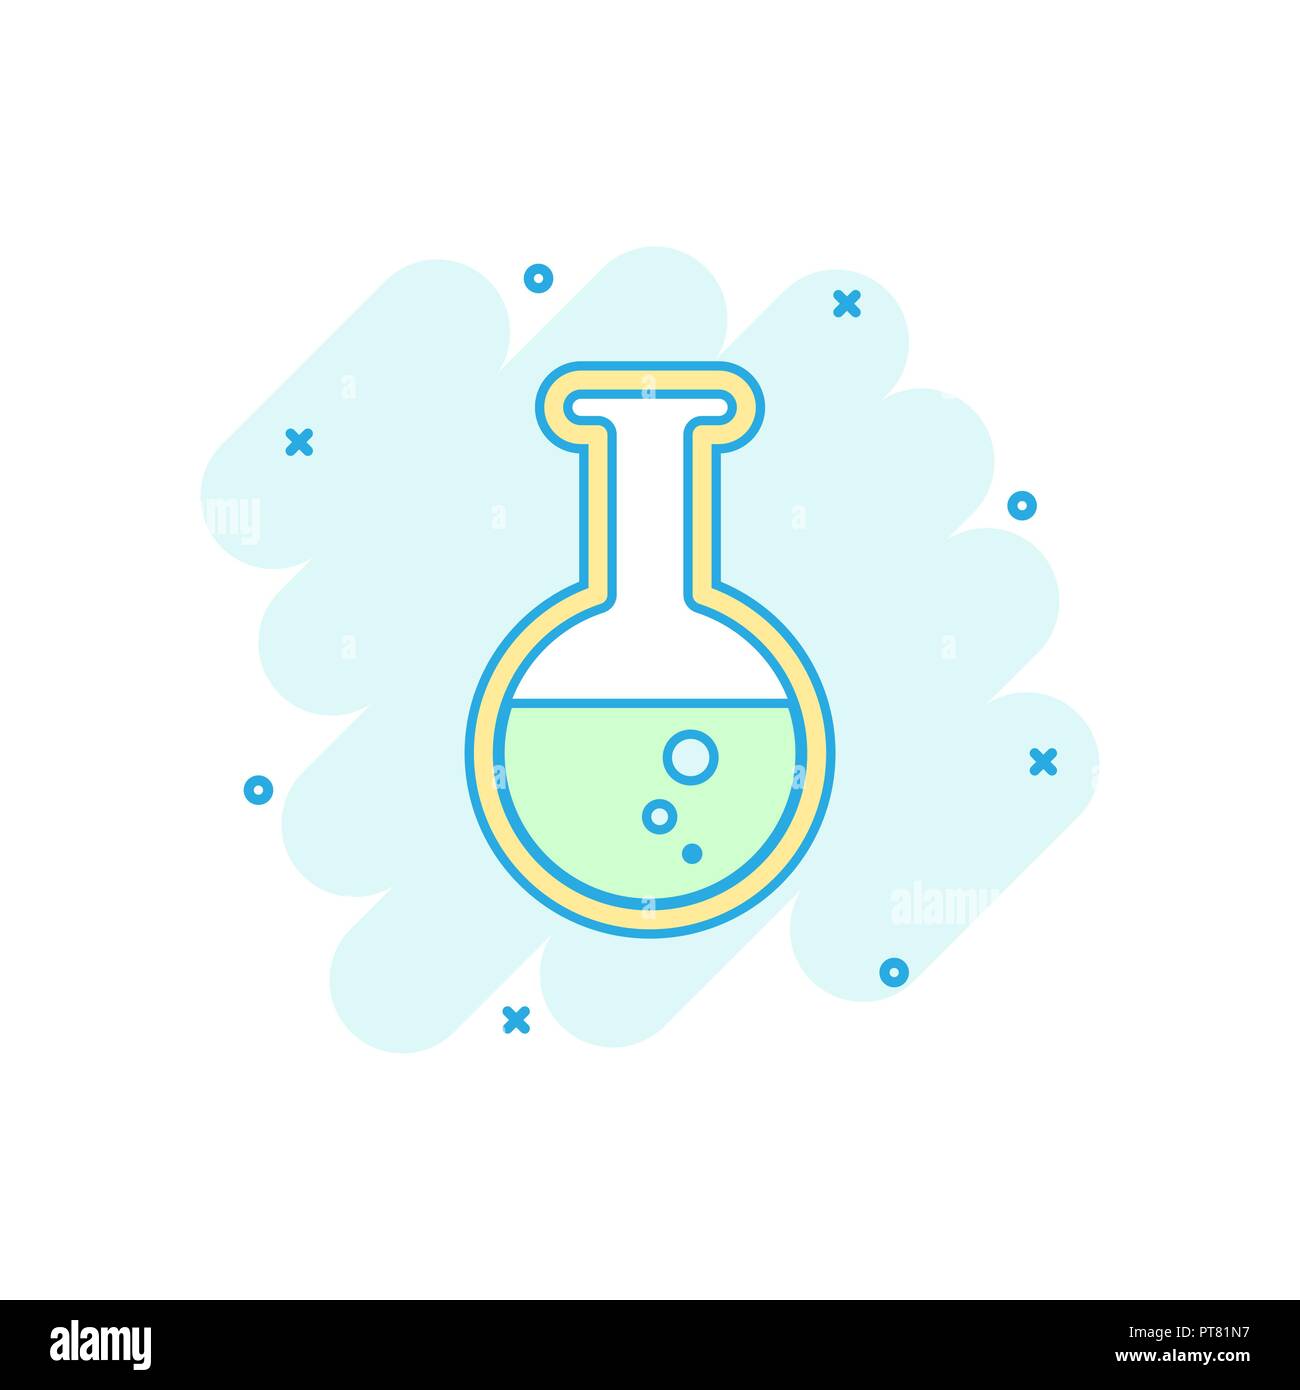 Cartoon colored chemical test tube icon in comic style. Laboratory glassware or beaker equipment illustration pictogram. Experiment flasks sign splash Stock Vector